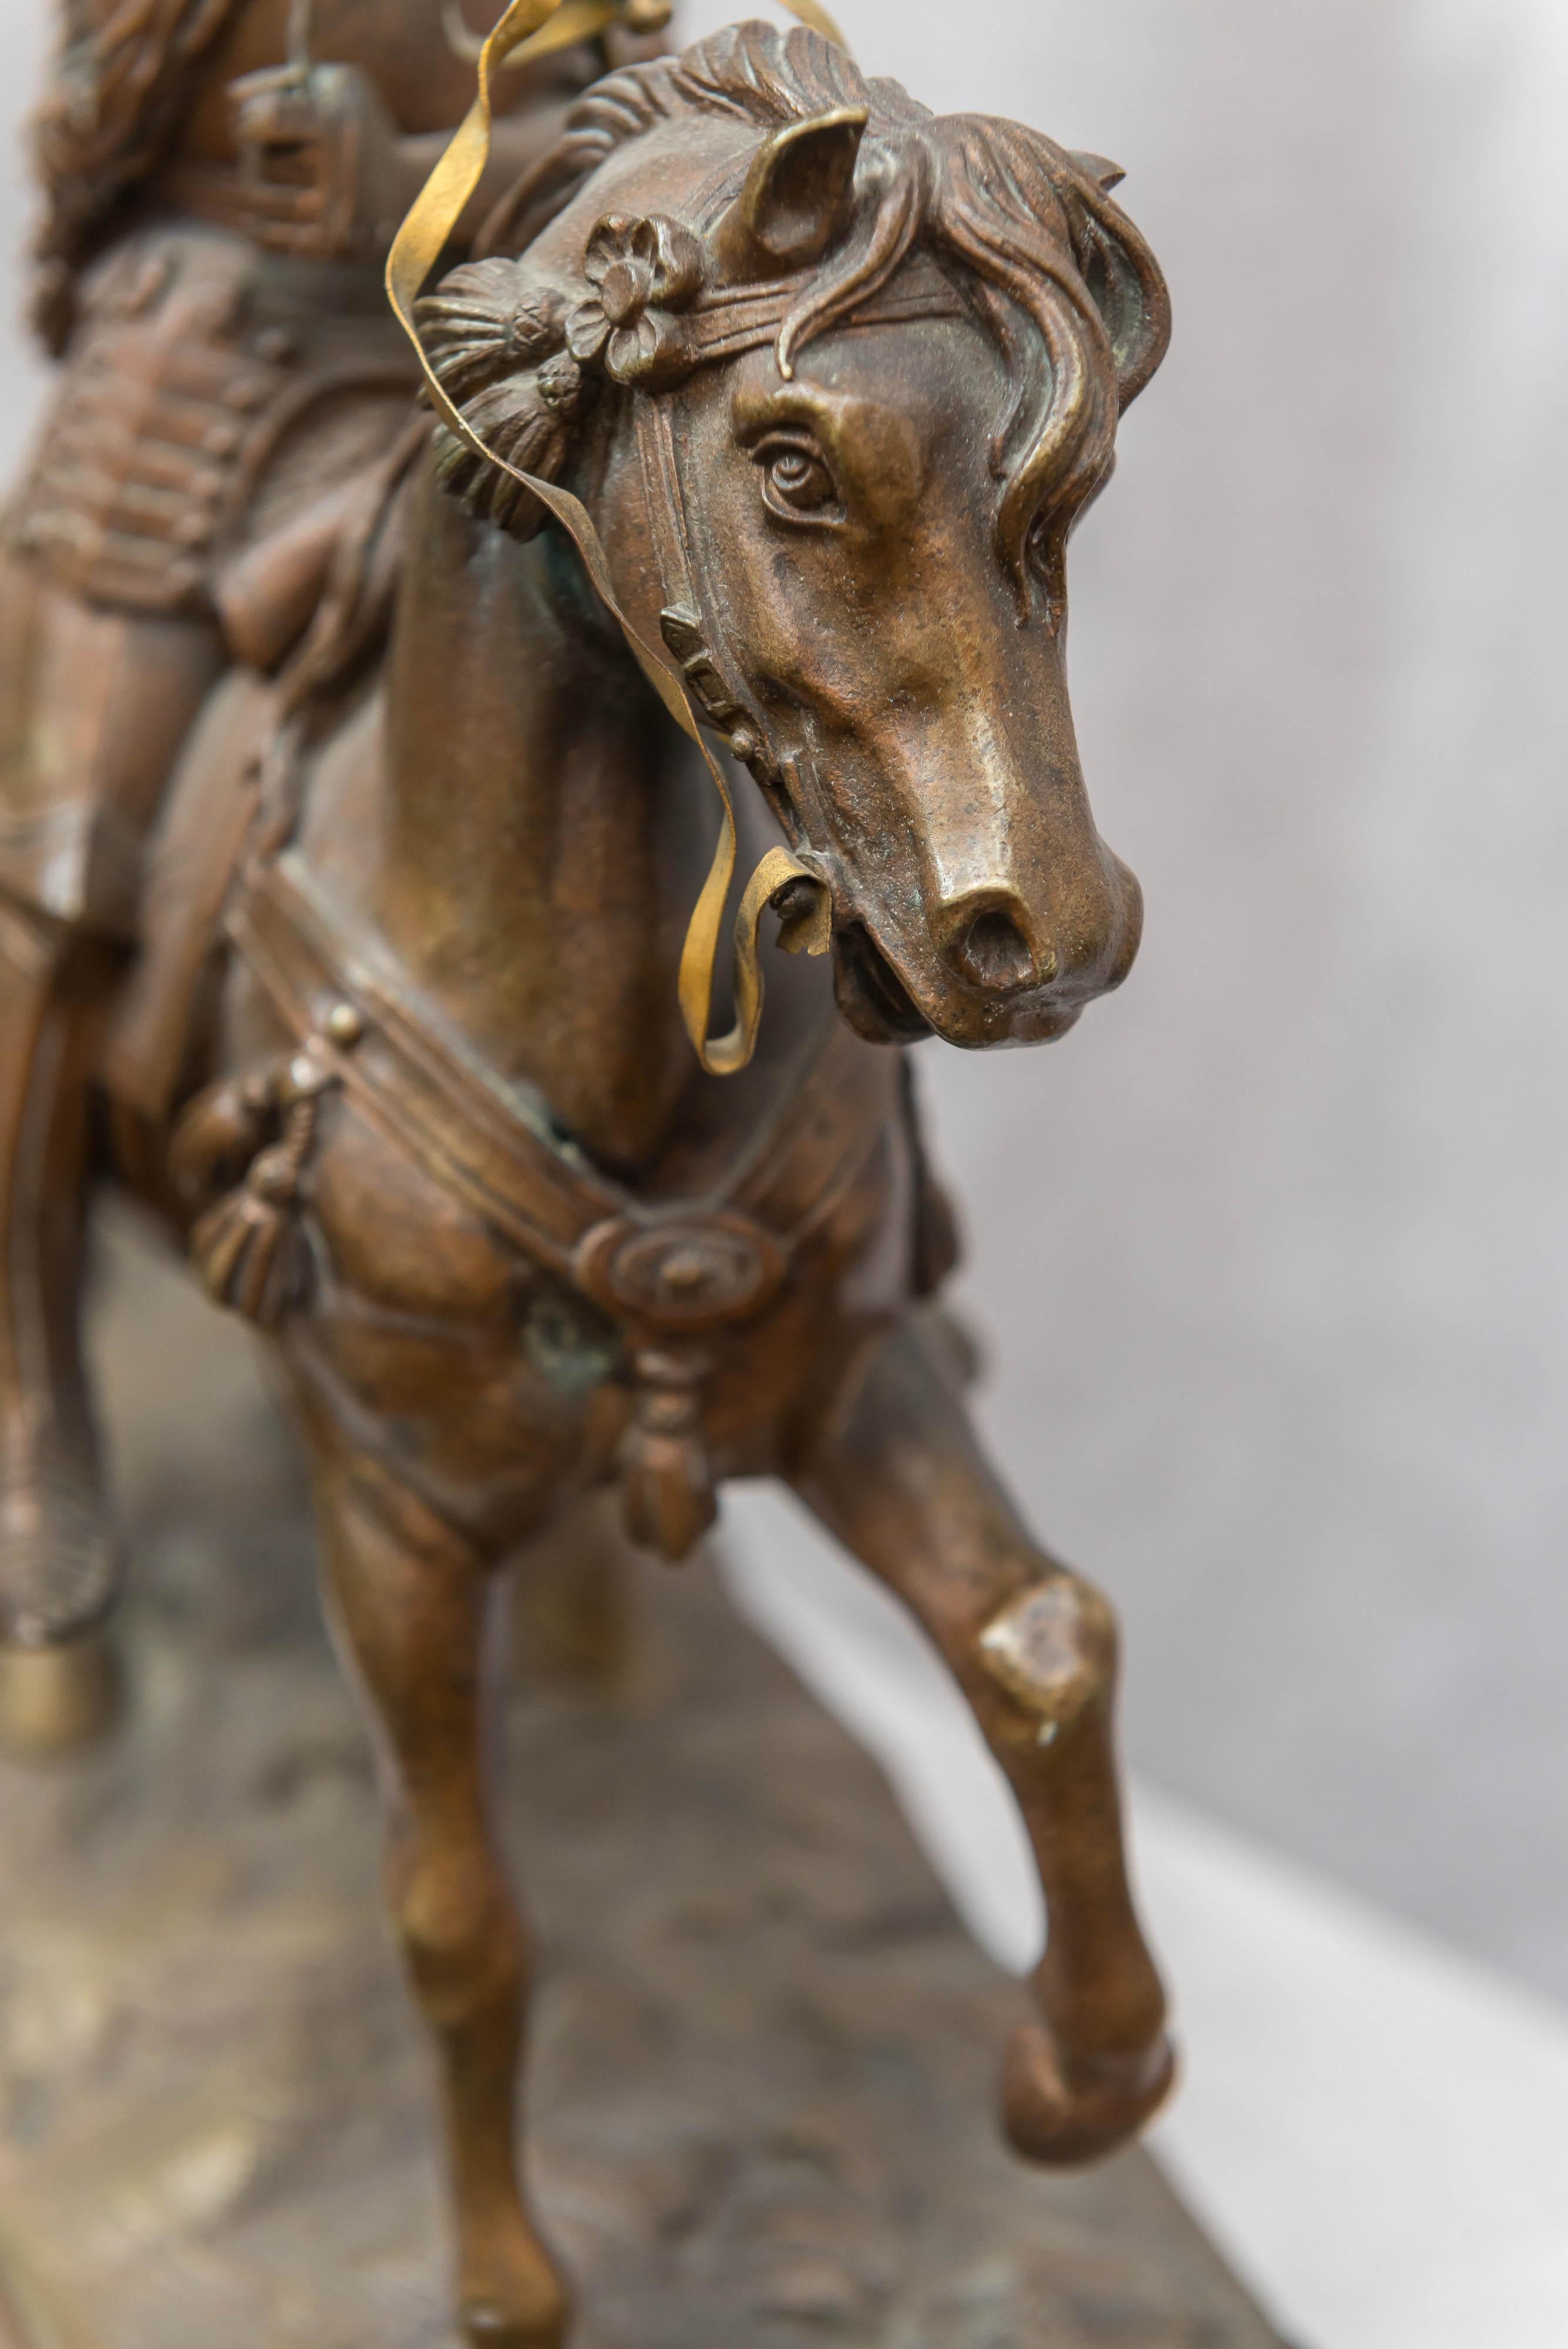 A very finely cast figure of a knight on a horse and mounted on a detailed bronze base. This example has all the elements for those who enjoy this subject matter. We are certain that this is late 19th century and French. For some reason unsigned.